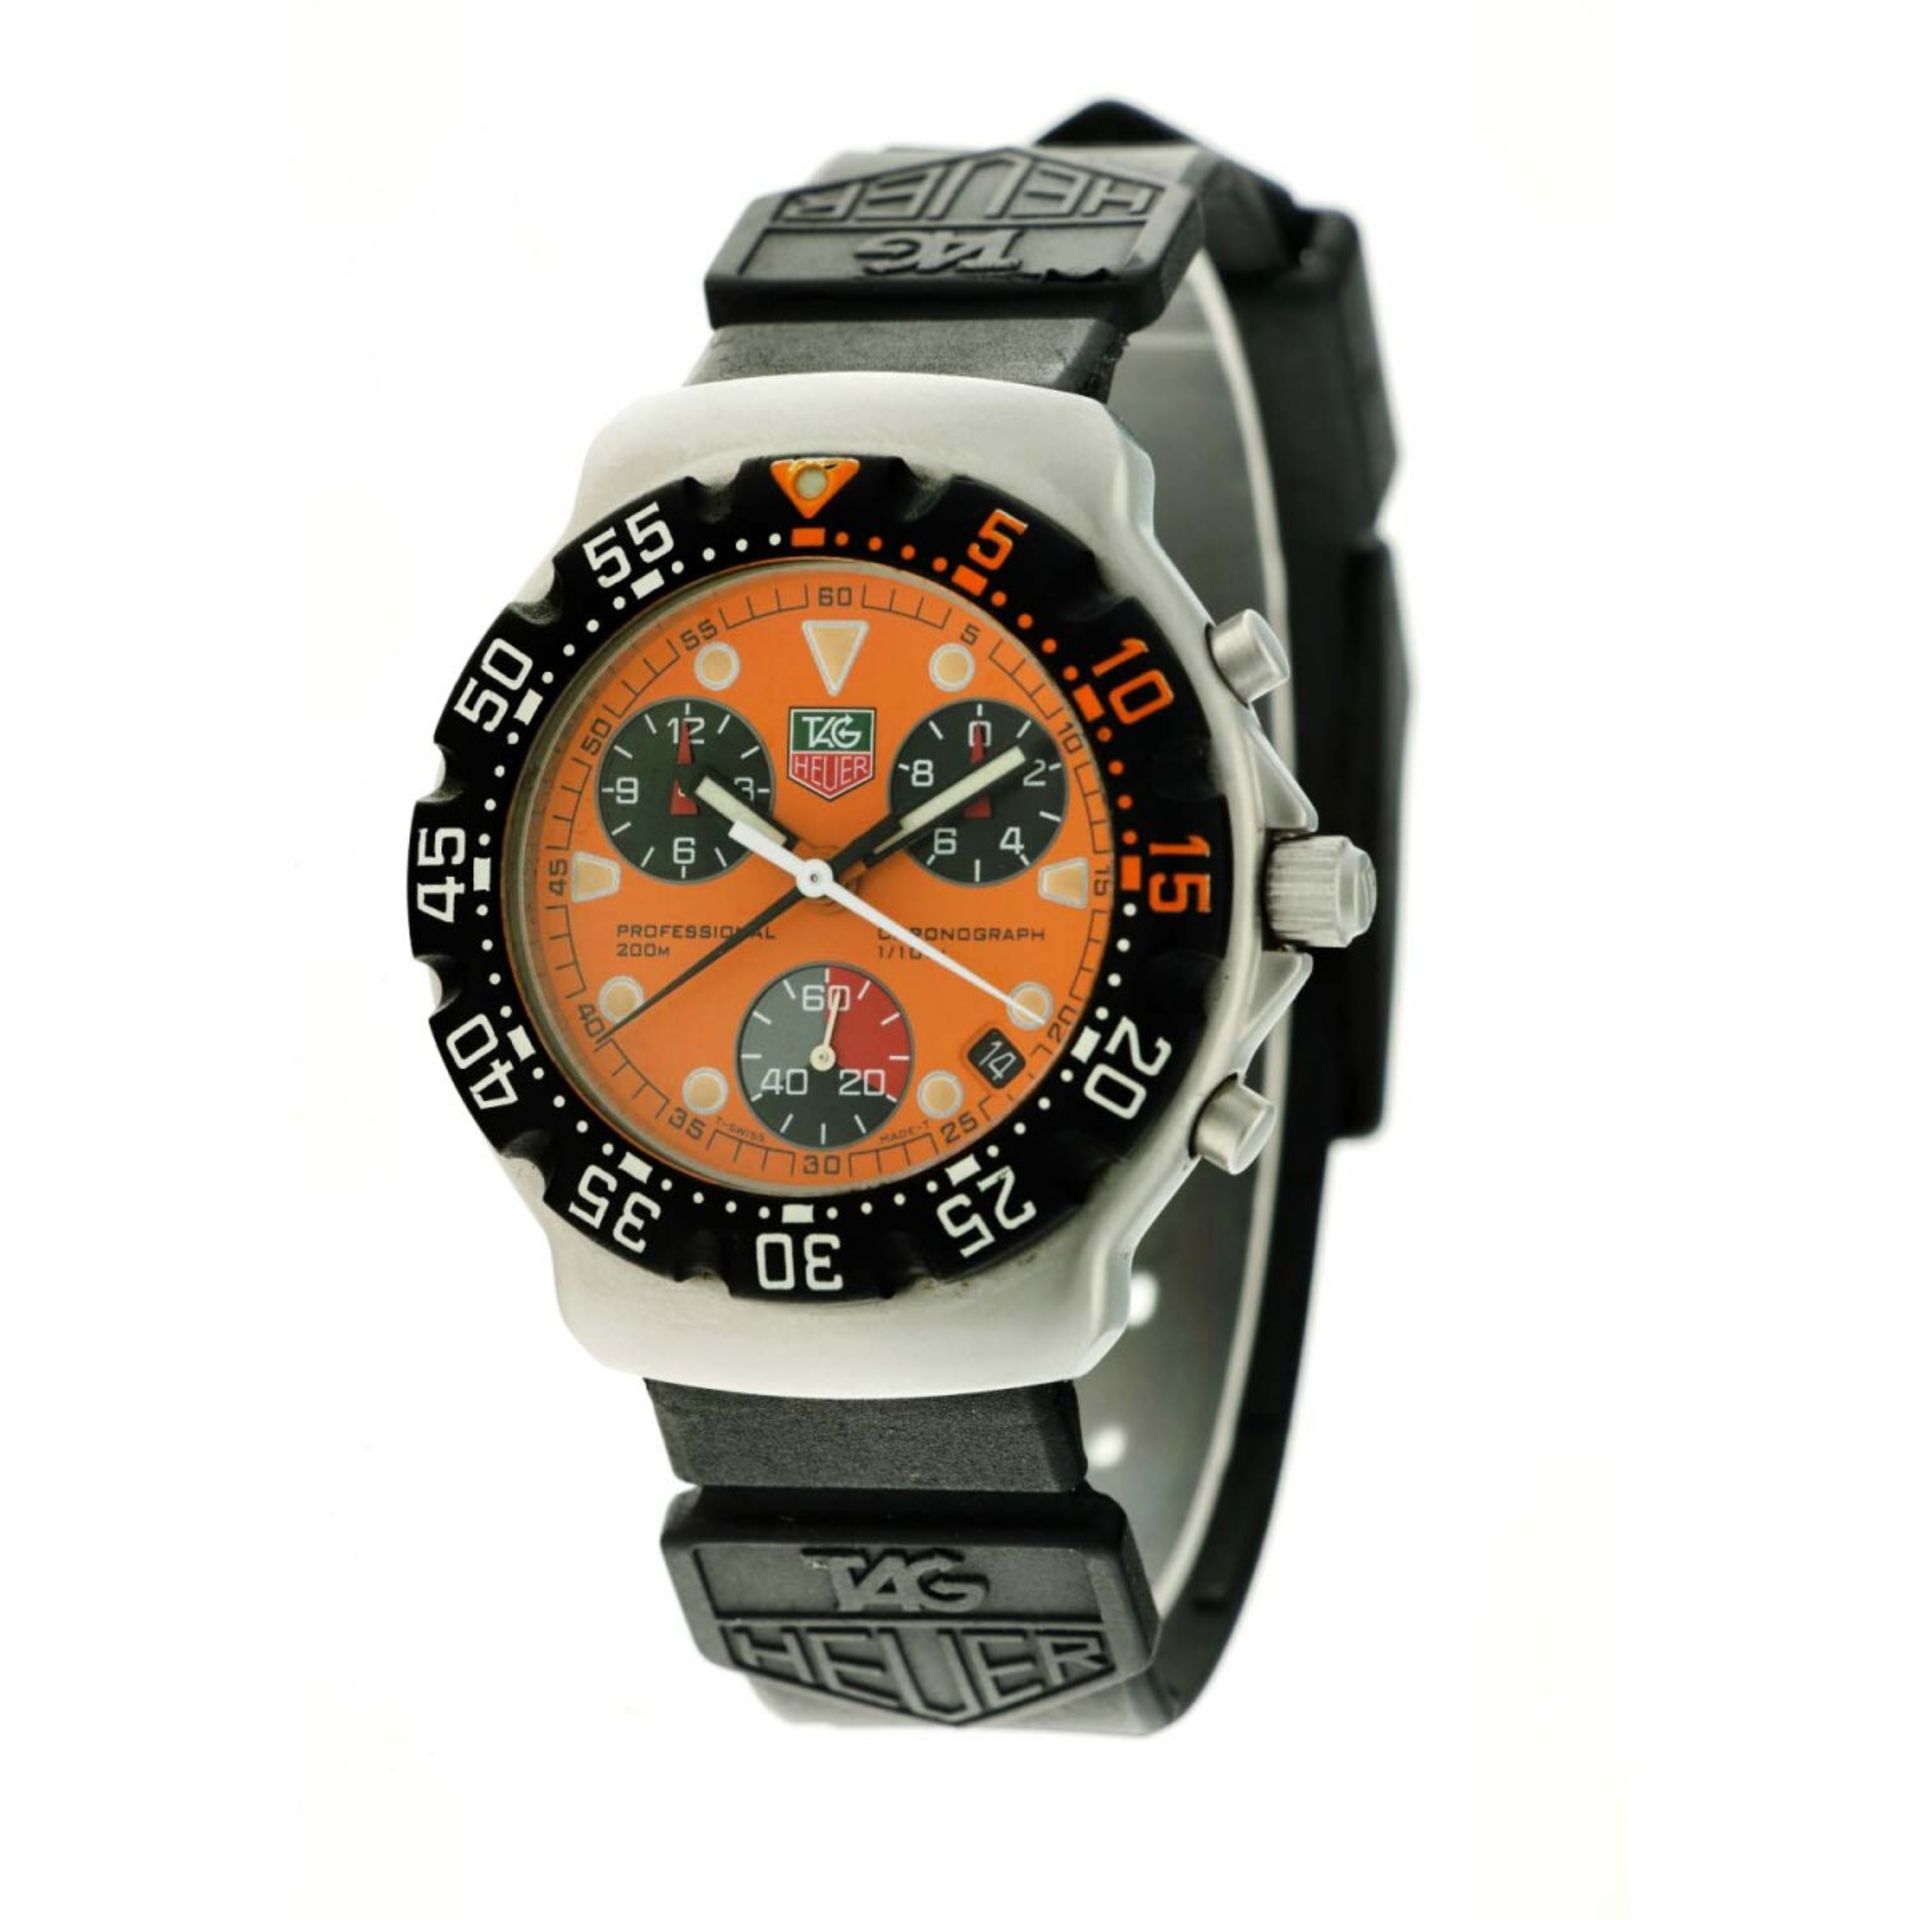 Tag Heuer - Professional 200 - Men's Watch - appr. 2000 - Image 2 of 5